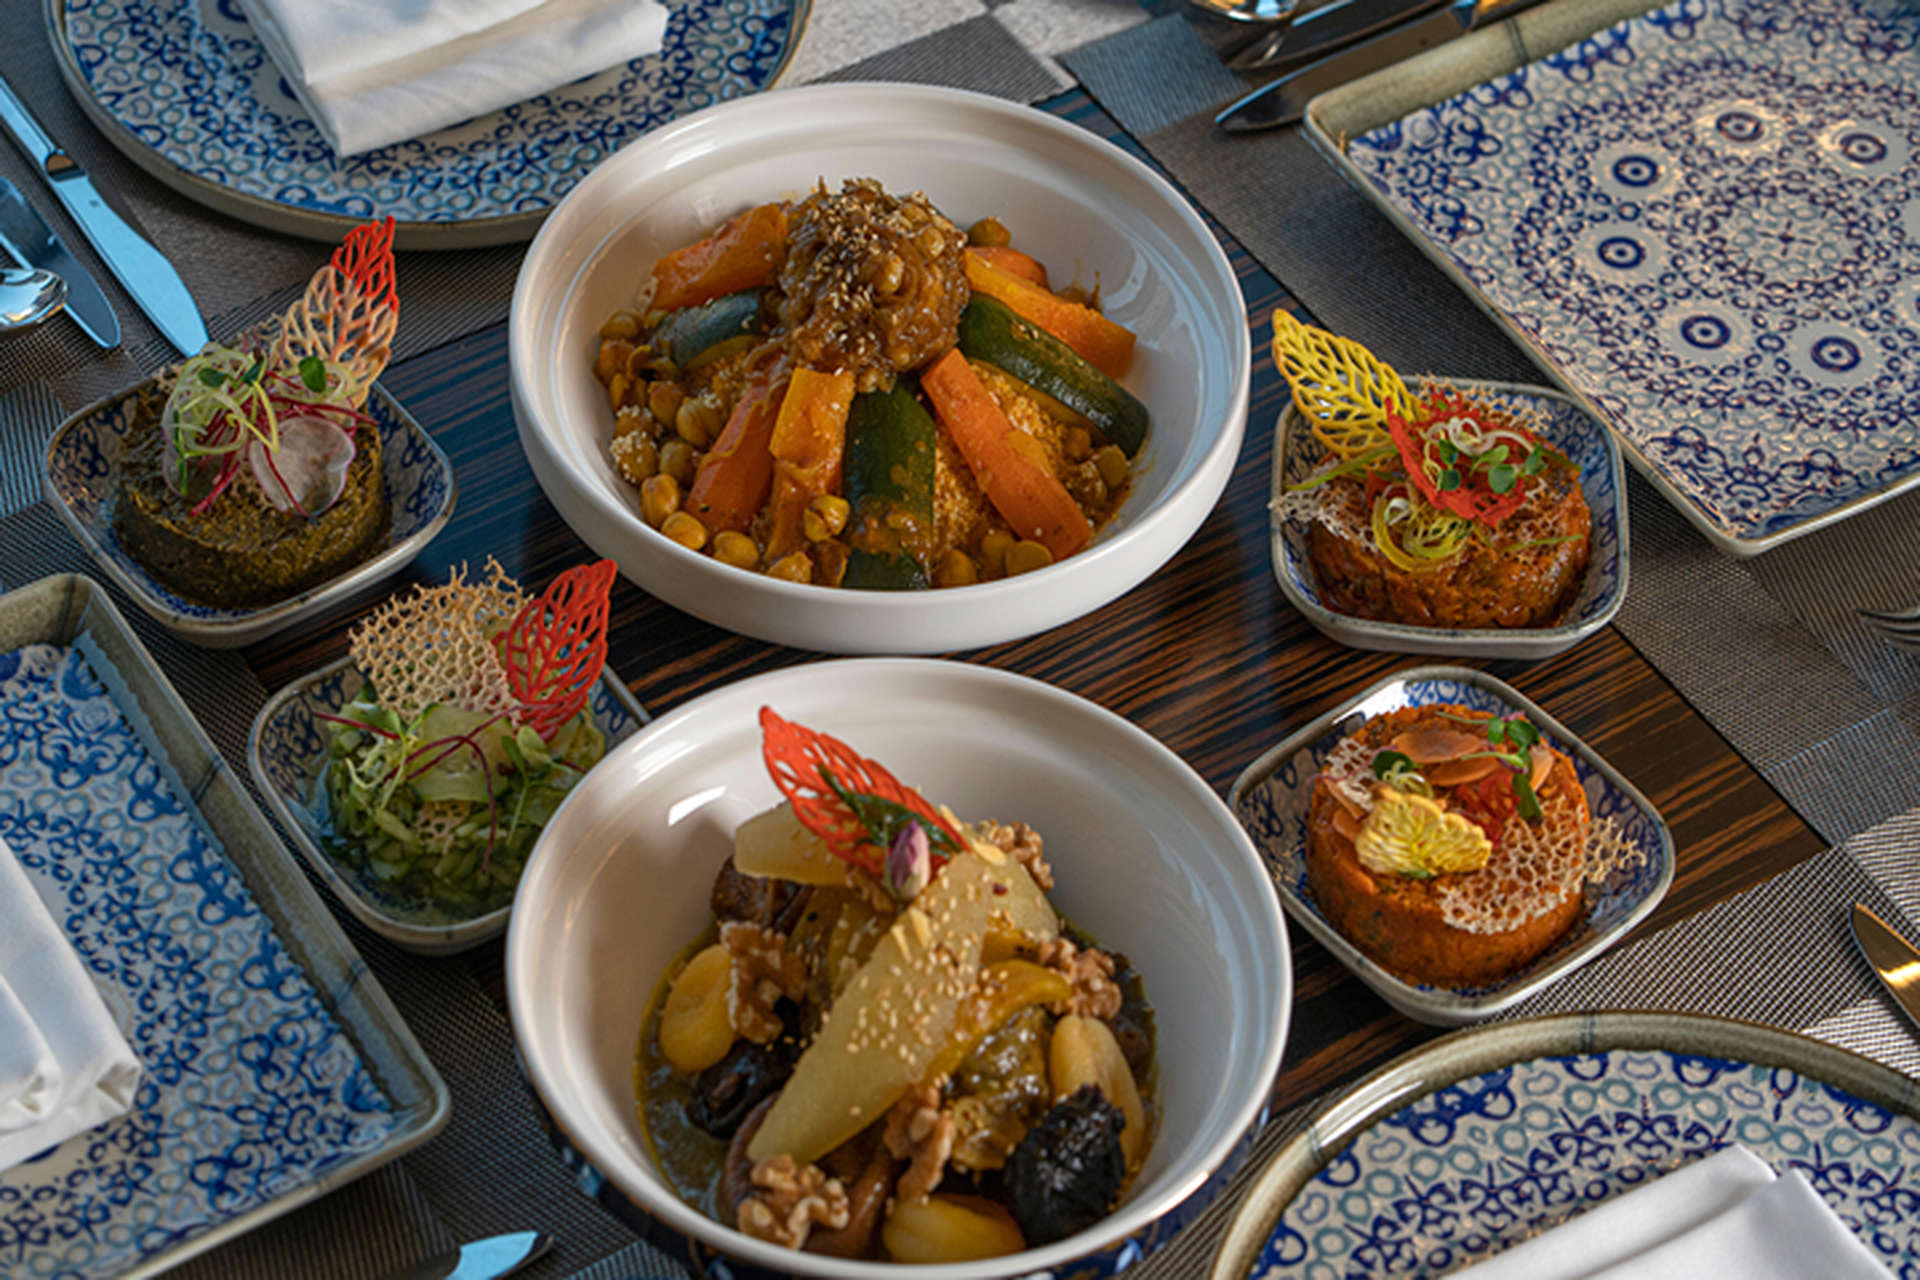 Experience traditional Moroccan favourites and a ceremonious tea service at Caza